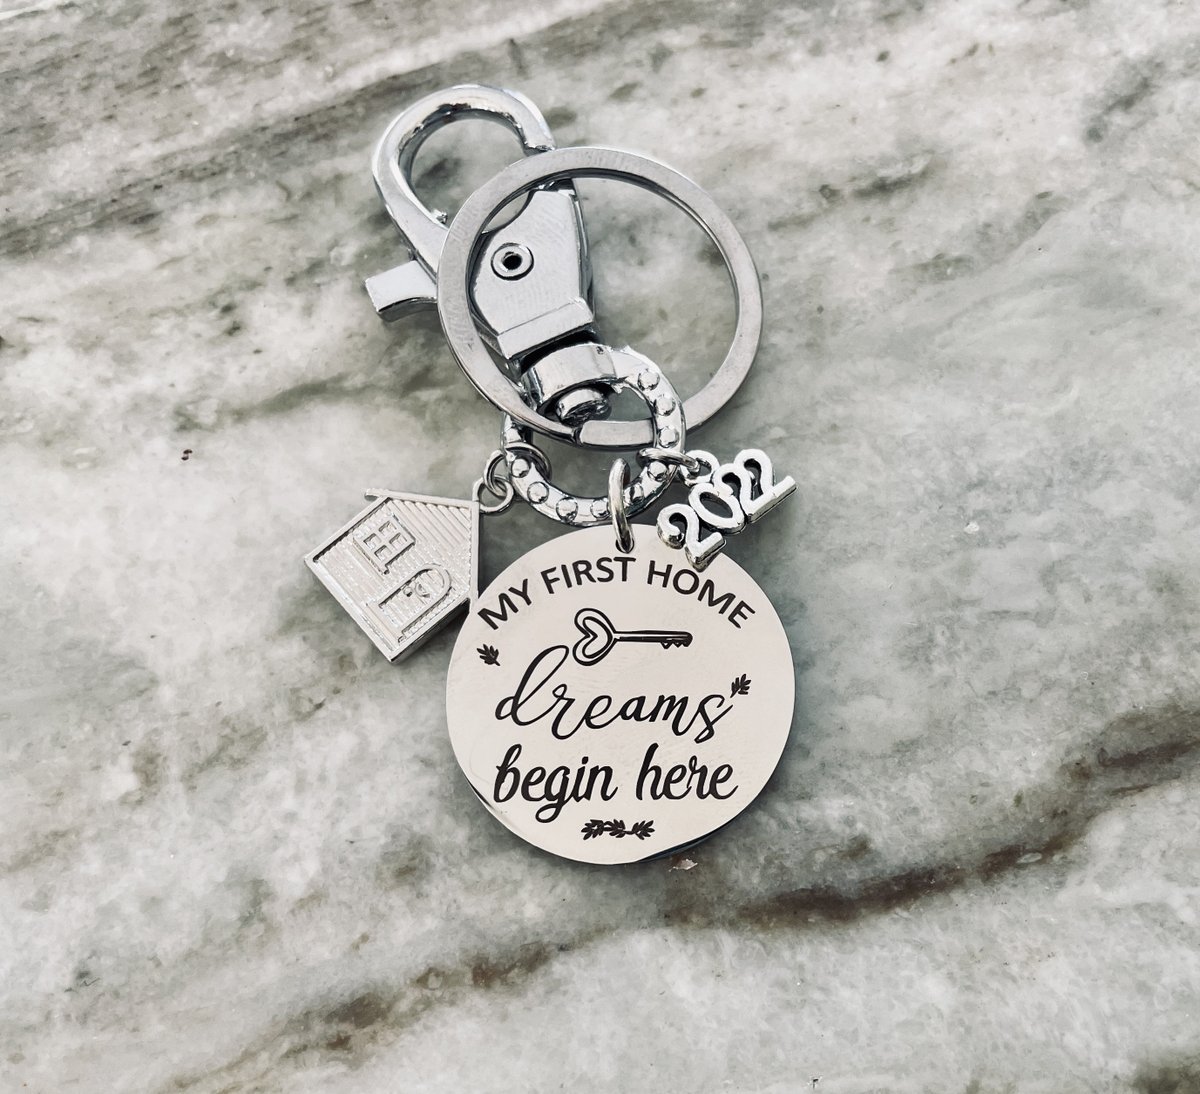 Excited to share the latest addition to my #etsy shop: 2023 My First Home Gift for New Home Owners Silver Key Chain Keyring FOB New #Homeowners Gift Dreams Begin Here New House First Home Gift etsy.me/41ewg5e #newhome #realtorgift #realtor #firsthome #keychain